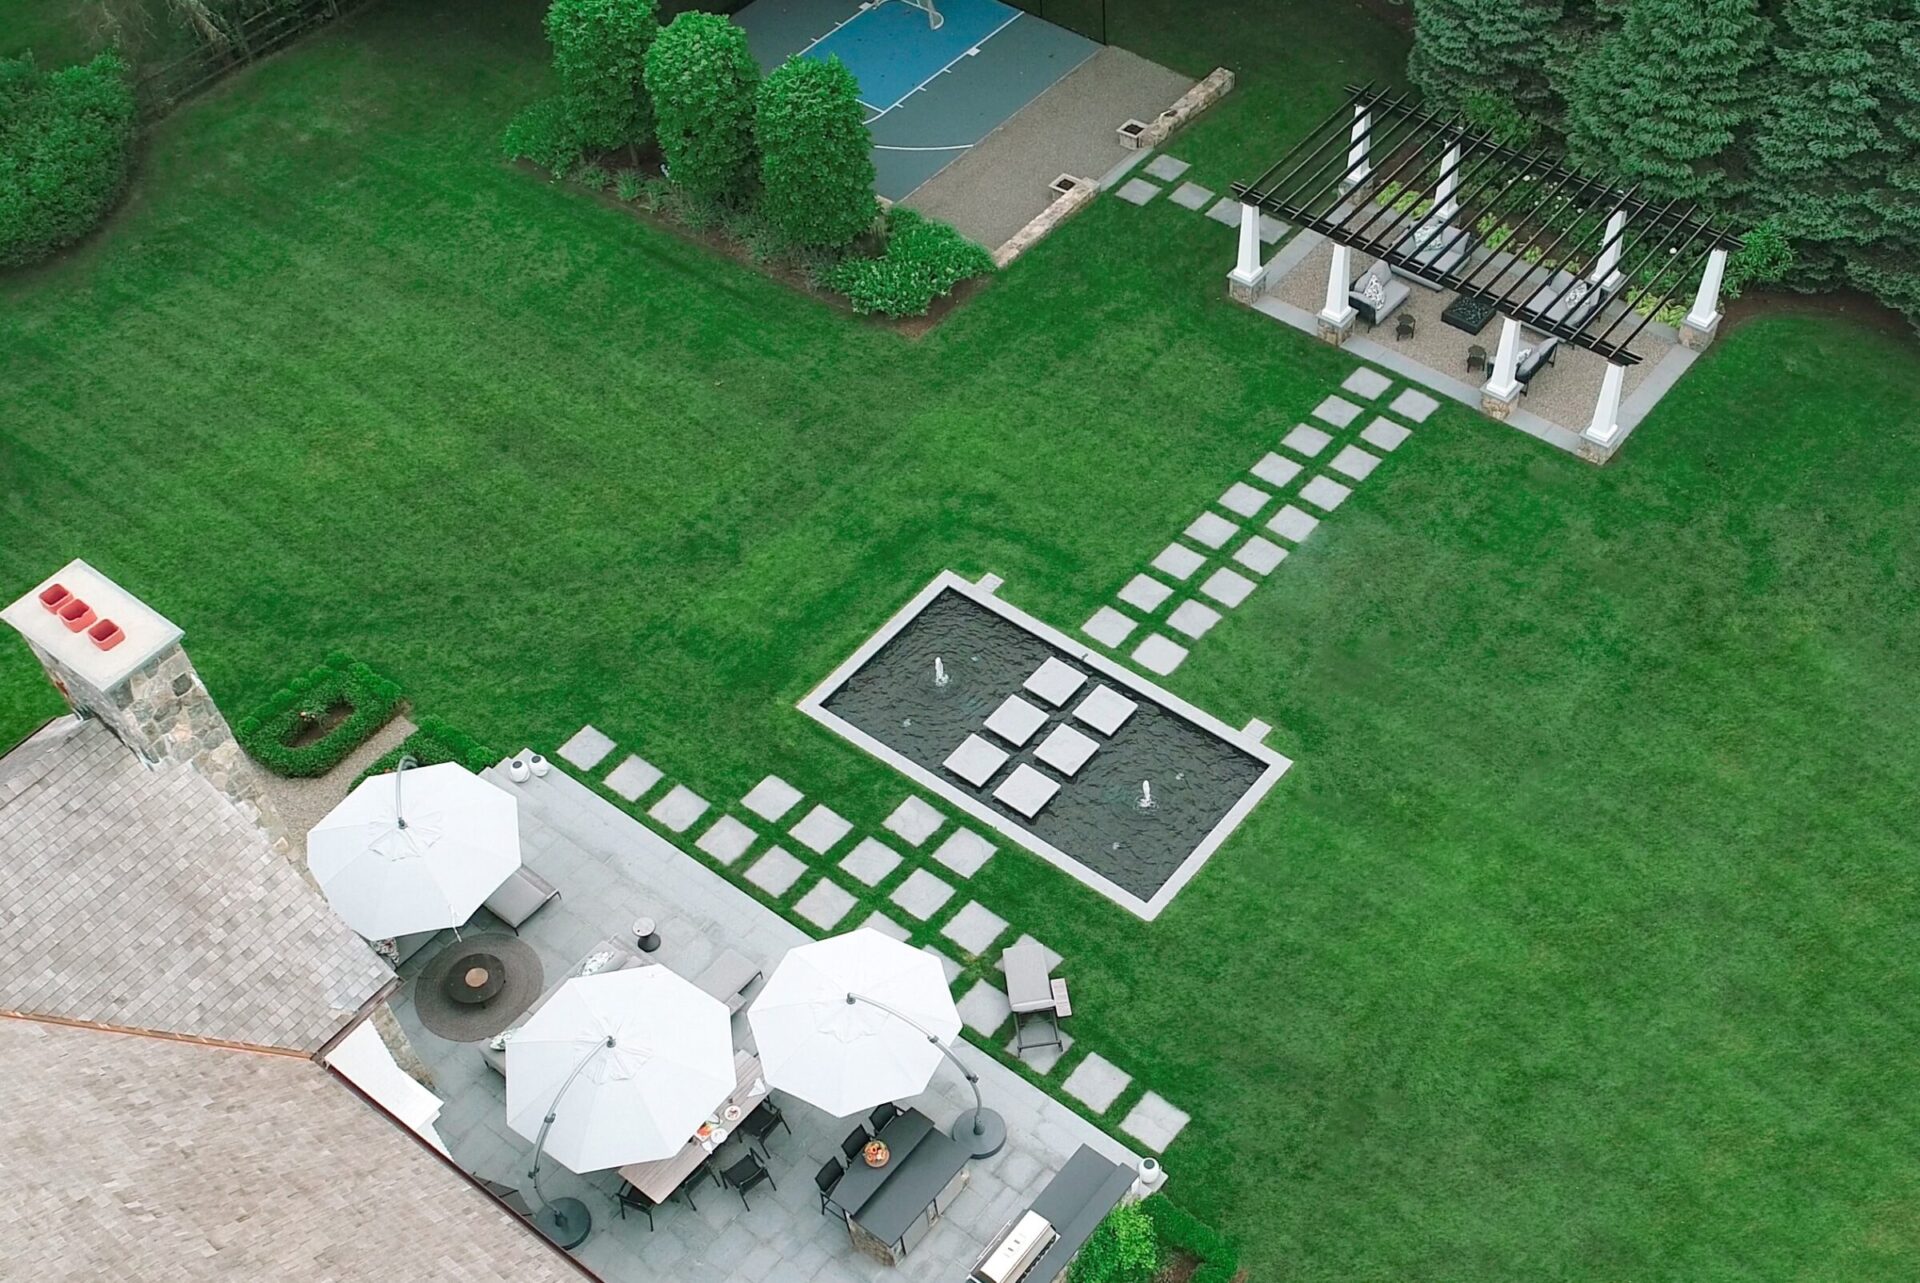 Aerial view of a landscaped backyard with a patio, umbrellas, seating areas, a basketball court, ornamental garden, lawn paths, and a decorative pergola.